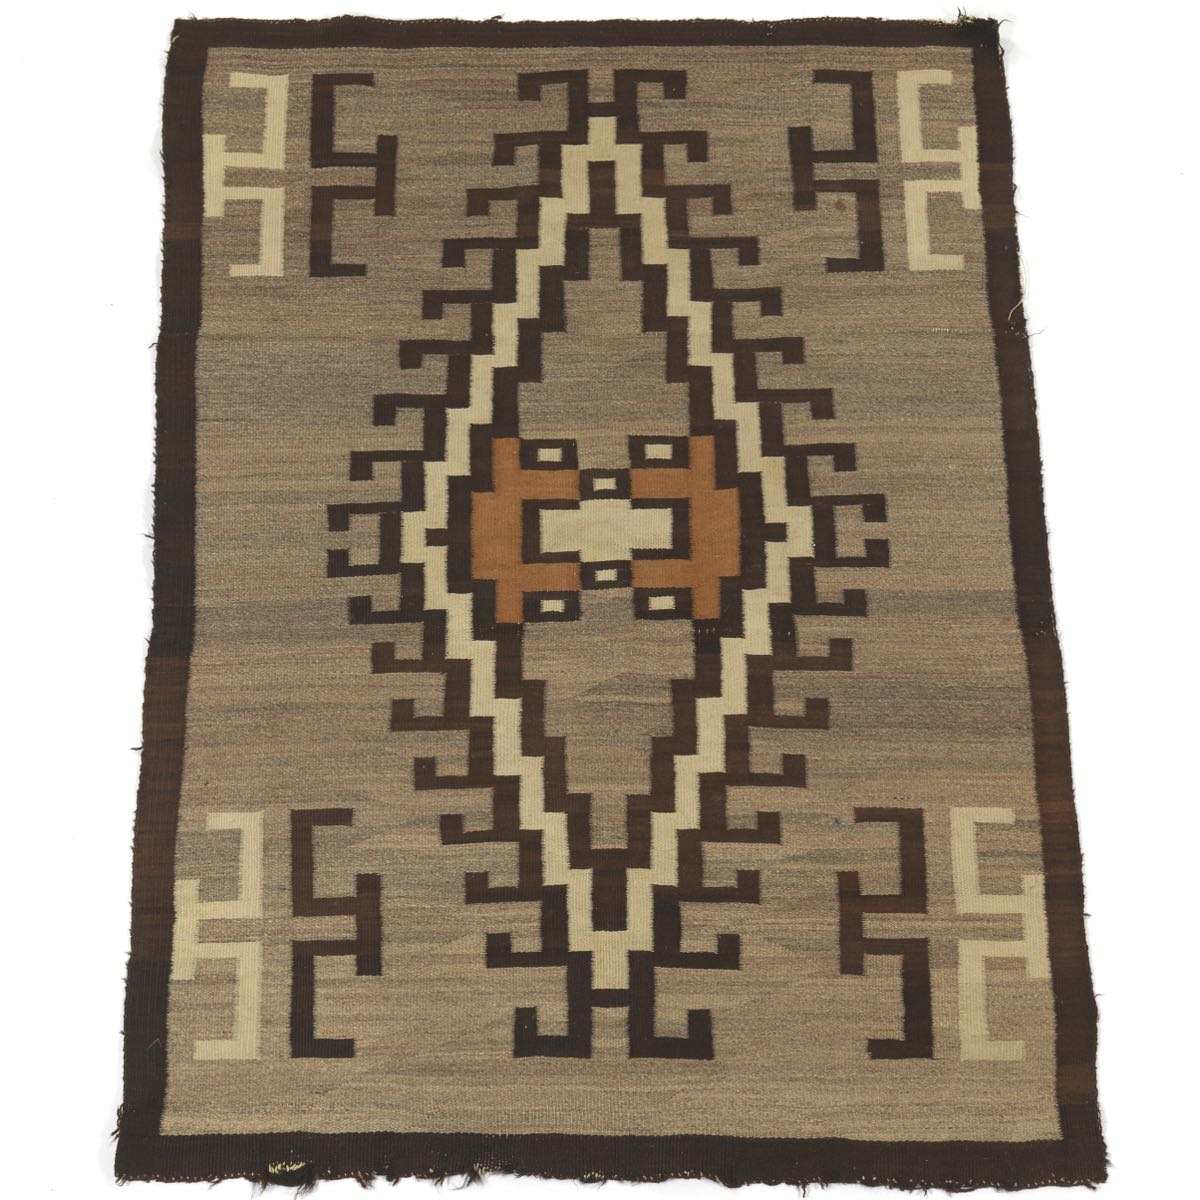 Navajo Blanket, ca. 1900 5'4" x 3'7-1/2"Homespun wool, tight weave with natural dyes, colors include